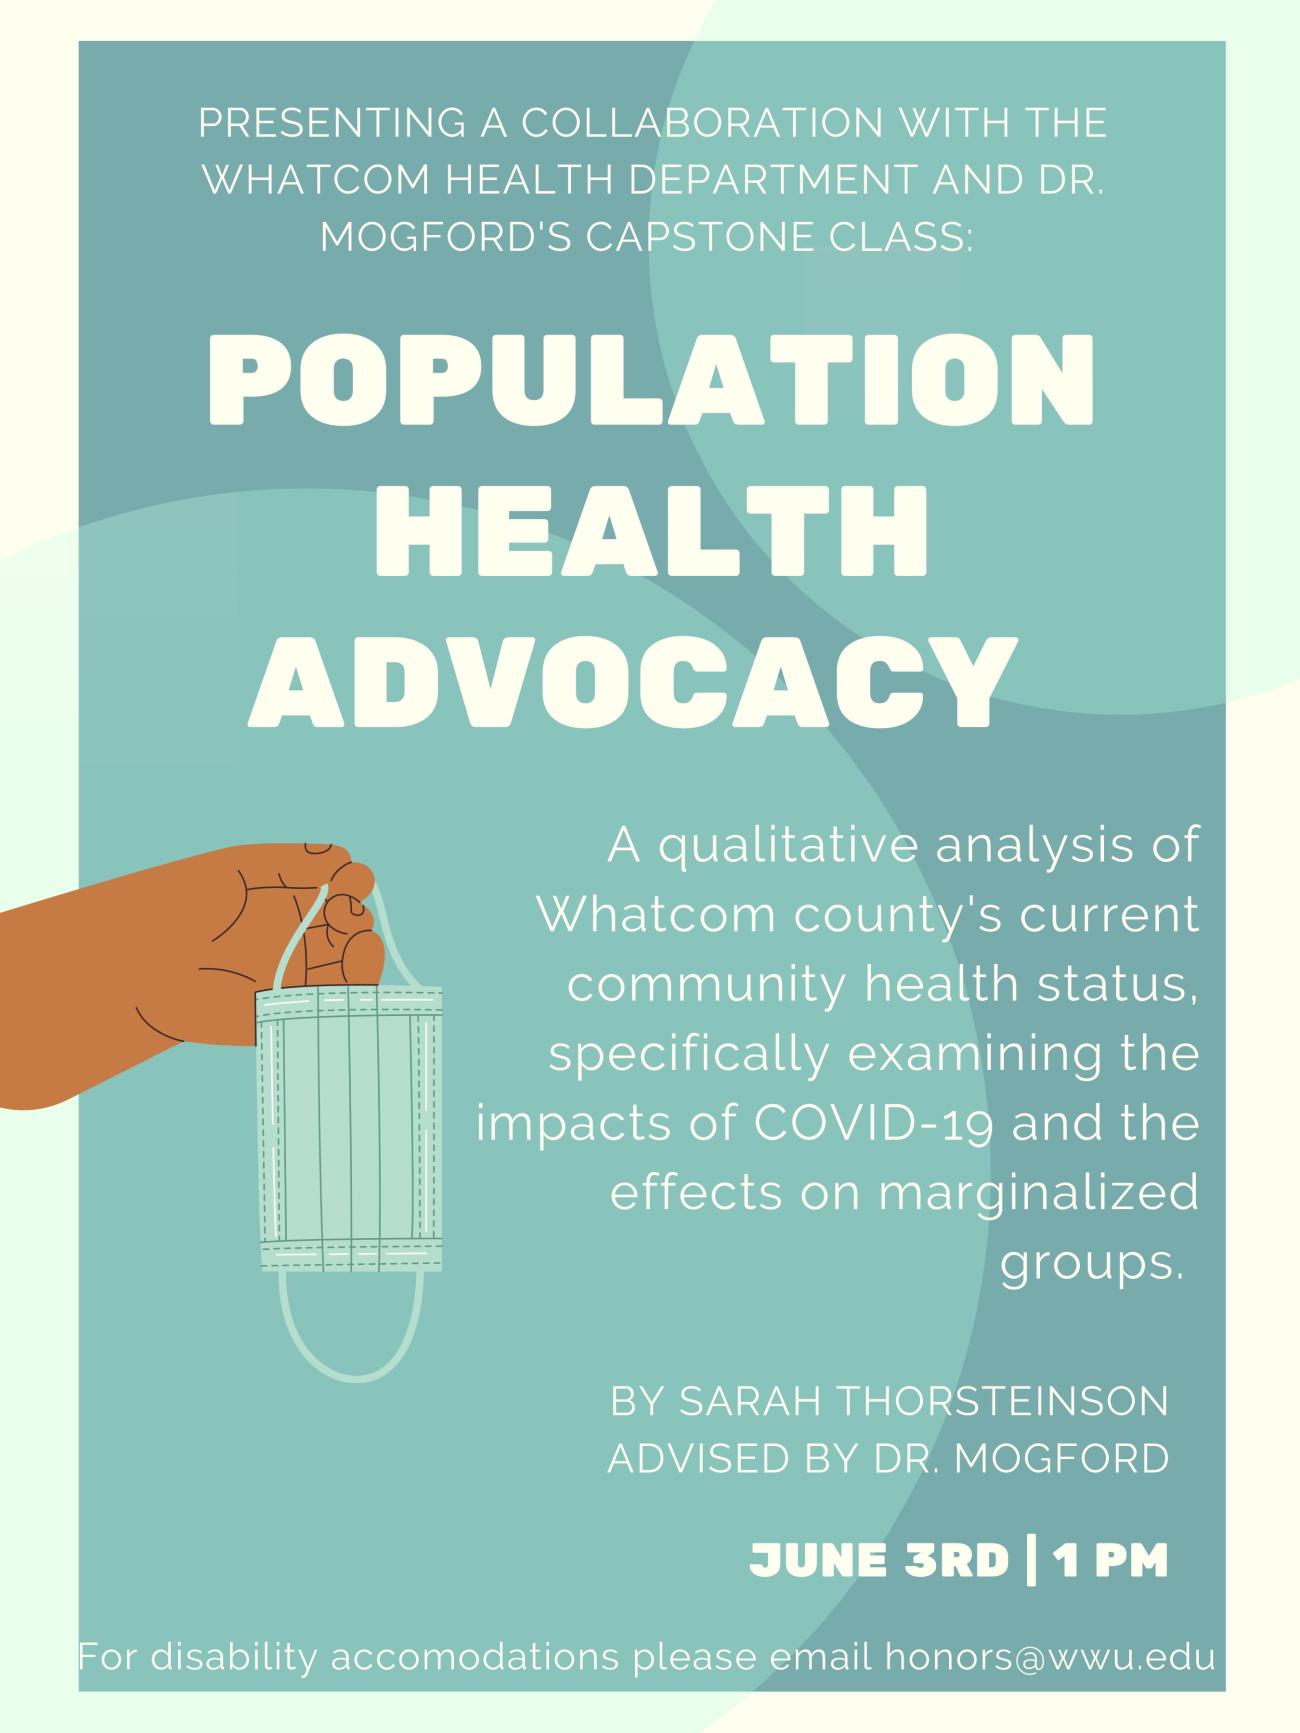 A blue background with a hand on the left holding a medical mask. Text reads: "Presenting a collaboration with the Whatcom Health Department and Dr. Mogford's capstone class: Population Health Advocacy A qualative analysis of Whatcom county's current community health status, specifically examining the impacts of COVID-19 and the effects on marginalized groups. By Sarah Thorsteinson, advised by Dr. Mogford. For disability accomodations please email honors@wwu.edu" 